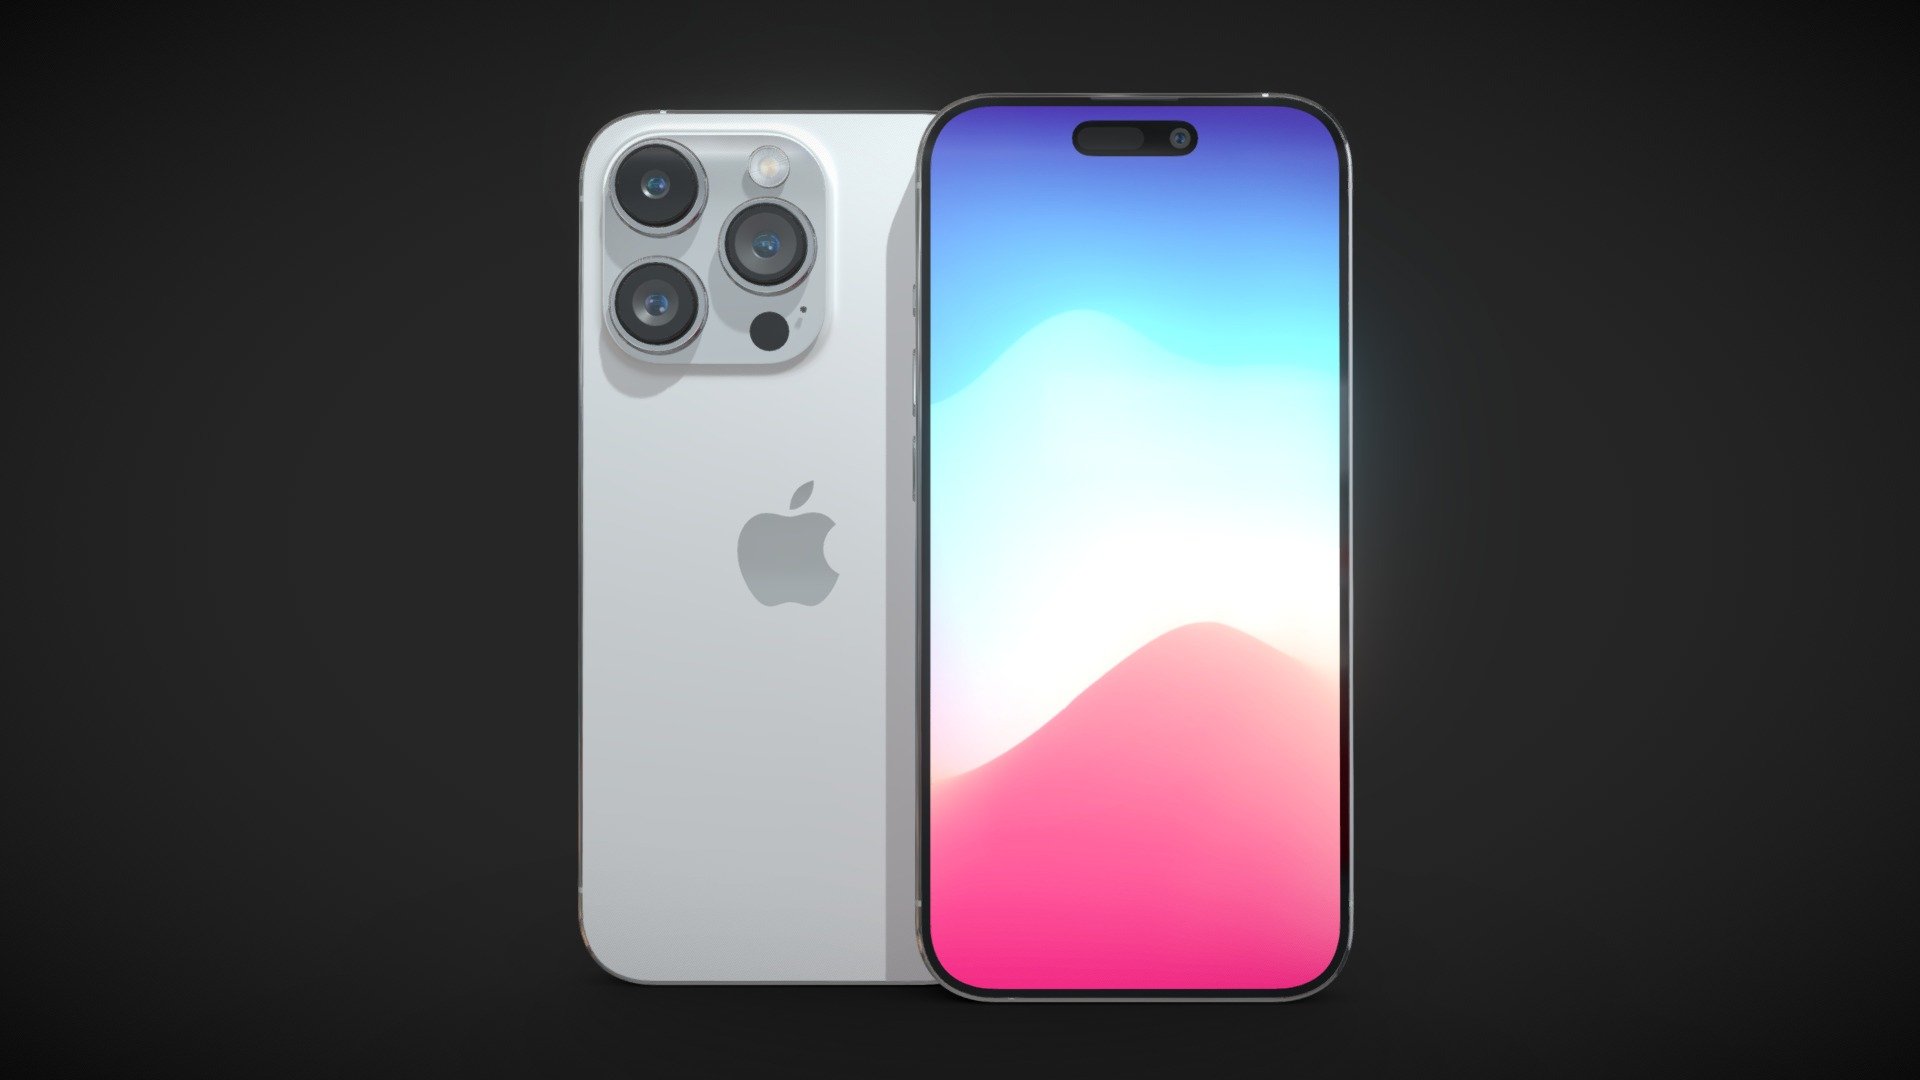 Realistic (copy) 3d model Apple iPhone 15 pro v1.

This set:




1 file obj standard

1 file 3ds Max 2013 vray material

1 file 3ds Max 2013 corona material

1 file of 3Ds

1 file e3d full set of materials.

1 file cinema 4d standard.

1 file blender cycles.

Topology of geometry:




forms and proportions of The 3D model

the geometry of the model was created very neatly

there are no many-sided polygons

detailed enough for close-up renders

the model optimized for turbosmooth modifier

Not collapsed the turbosmooth modified

apply the Smooth modifier with a parameter to get the desired level of detail

Materials and Textures:




3ds max files included Vray-Shaders

3ds max files included Corona-Shaders

Blender files included cycles shaders

Cinema 4d files included Standard-Shaders

Element 3d files

all texture paths are cleared

Organization of scene:
- to all objects and materials
- real world size (system units - mm)
- coordinates of location of the model in space (x0, y0, z0) - Apple iPhone 15 pro v1 - Buy Royalty Free 3D model by madMIX 3d model